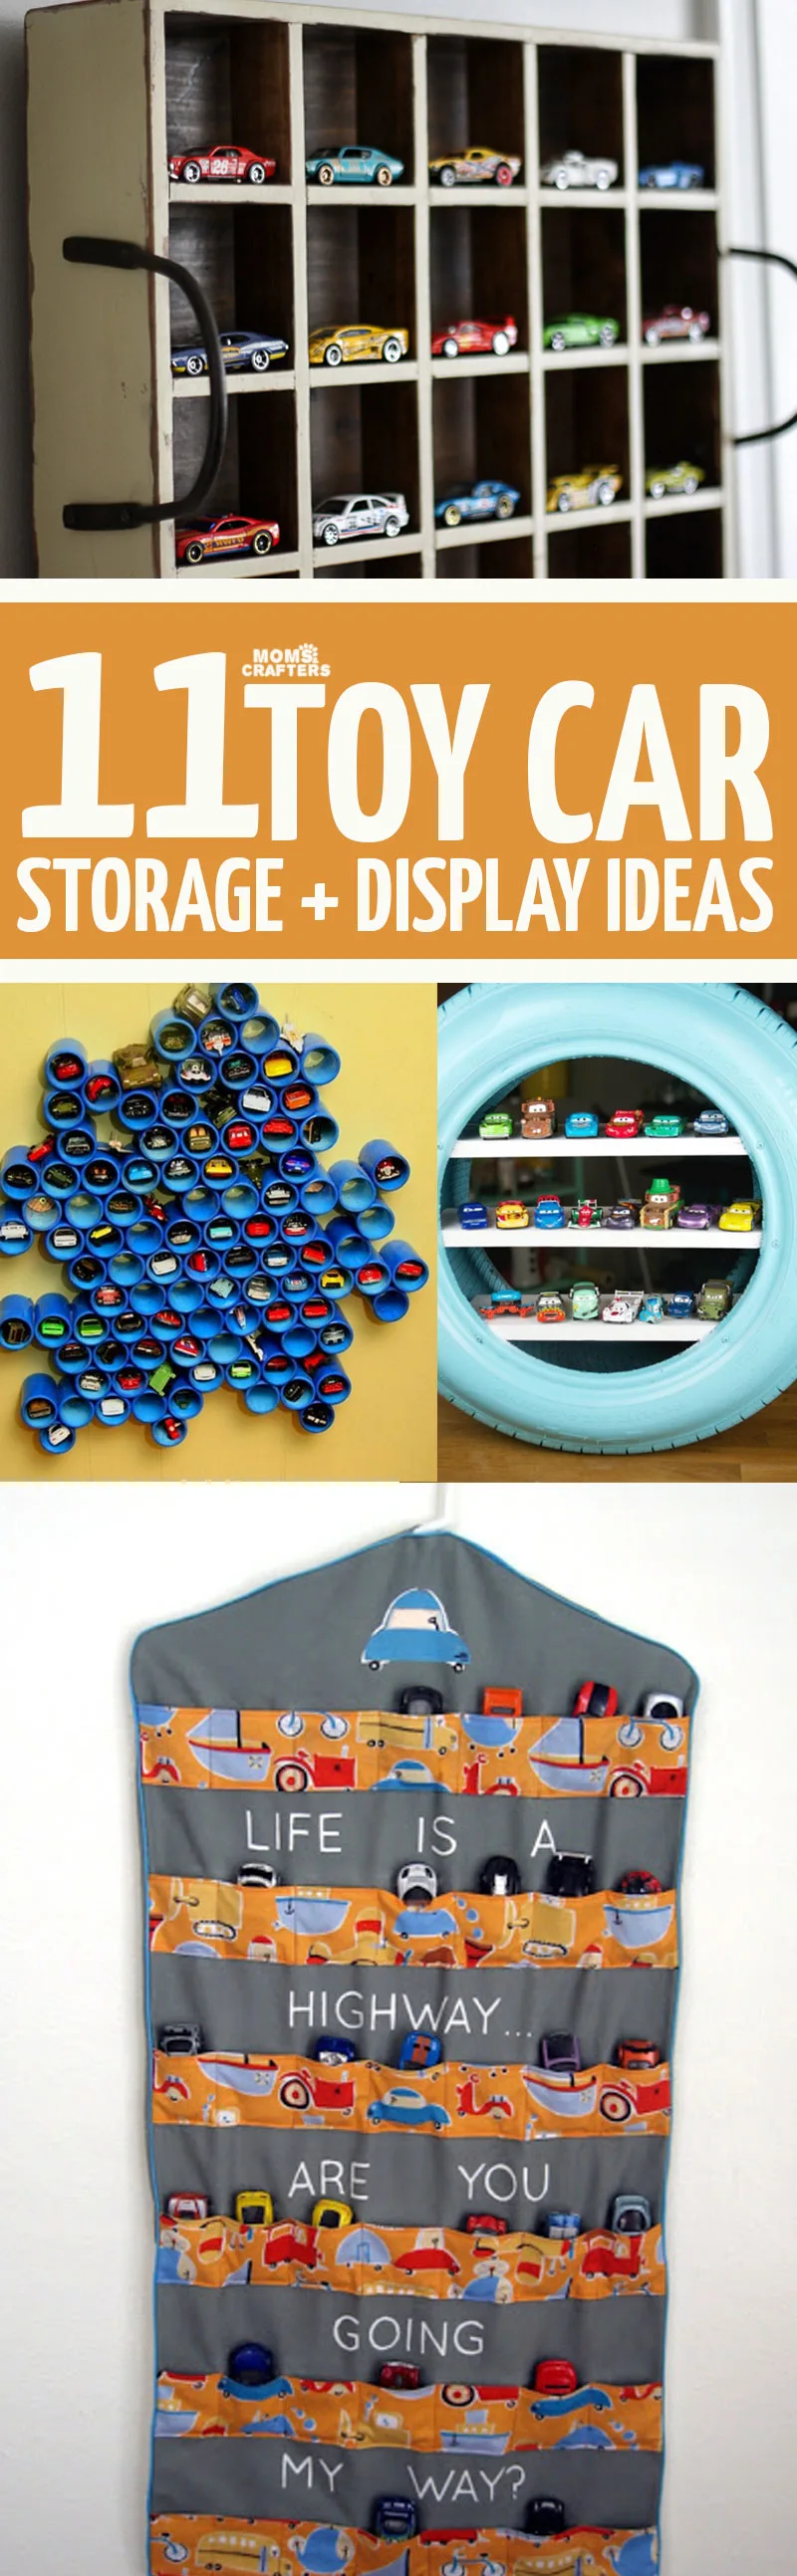 Click for 11 brilliant and beautiful Hot Wheels display and storage ideas - the perfect way to organize your toy cars! Display your Matchbox cars beautifully with these cool toy organization hacks. #organization #toys #hotwheels